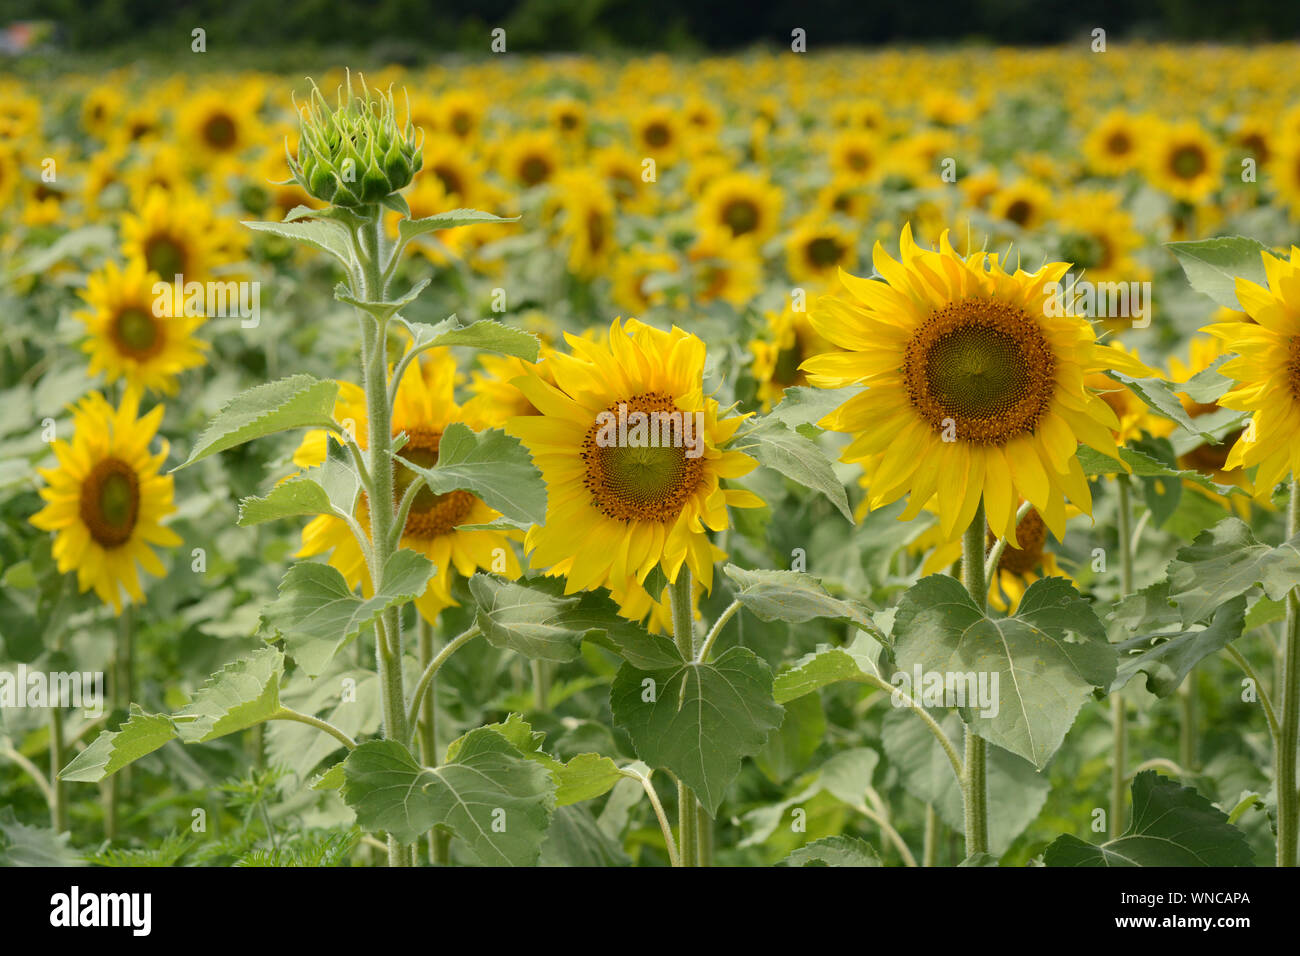 Close up horizontal photograph of bright sunflowers in a field. Stock Photo